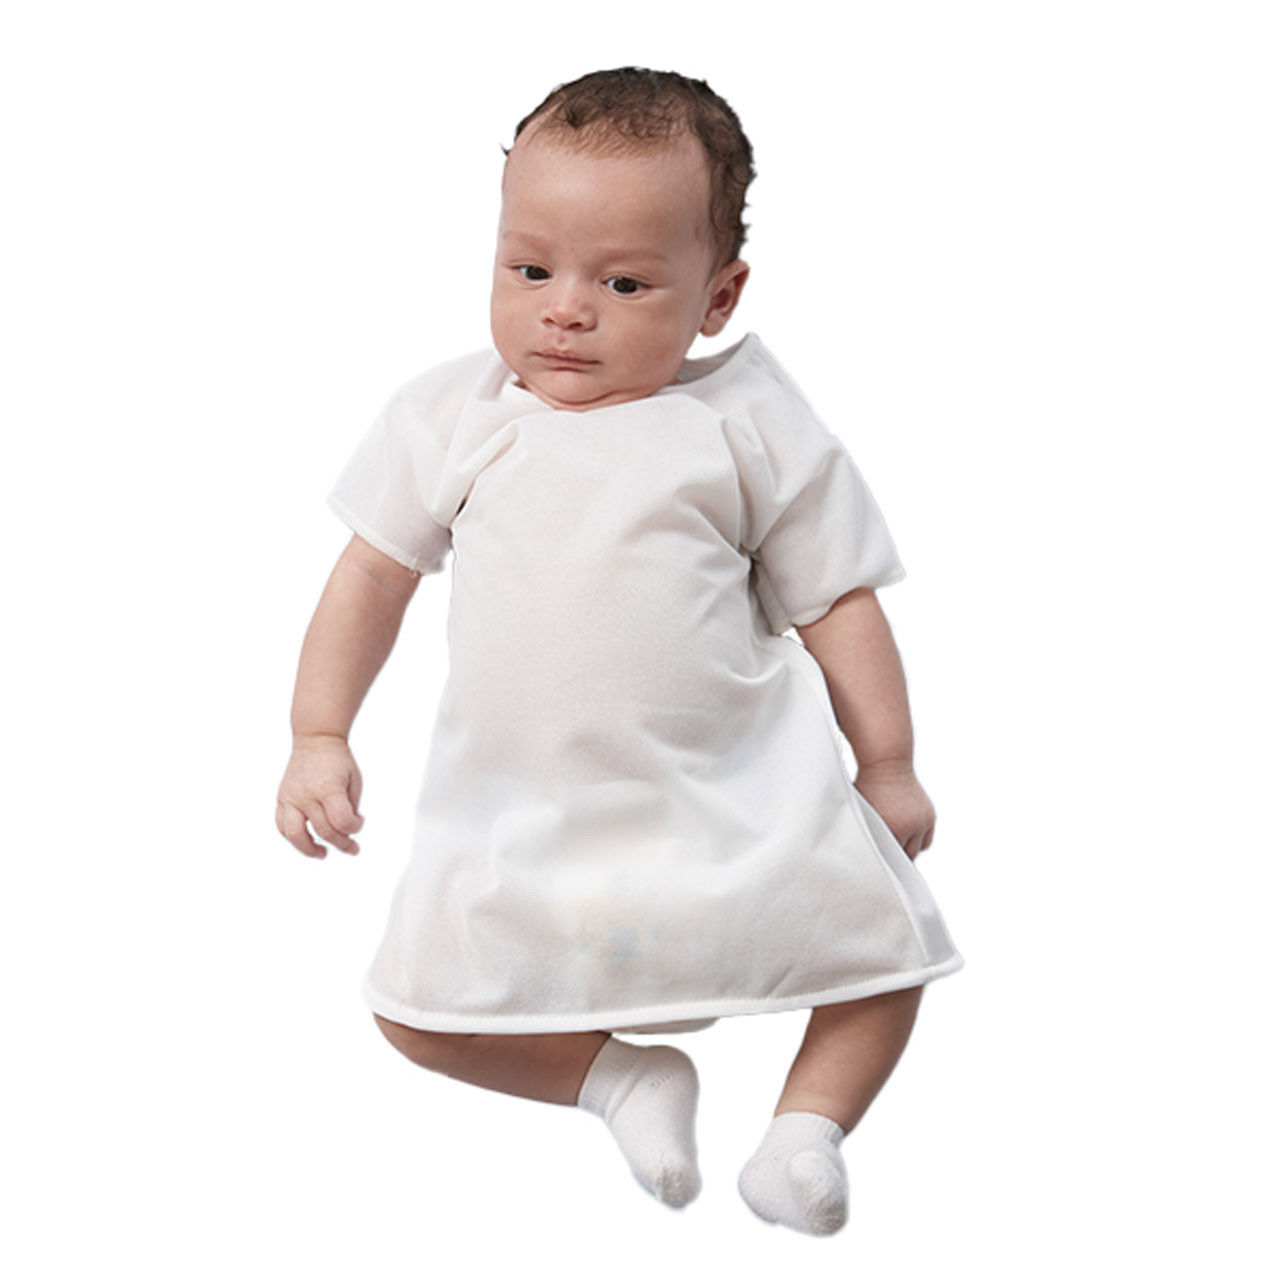 What color is the baby hospital gown in the 'Pediatric Hospital Gowns, White - In Bulk' product?